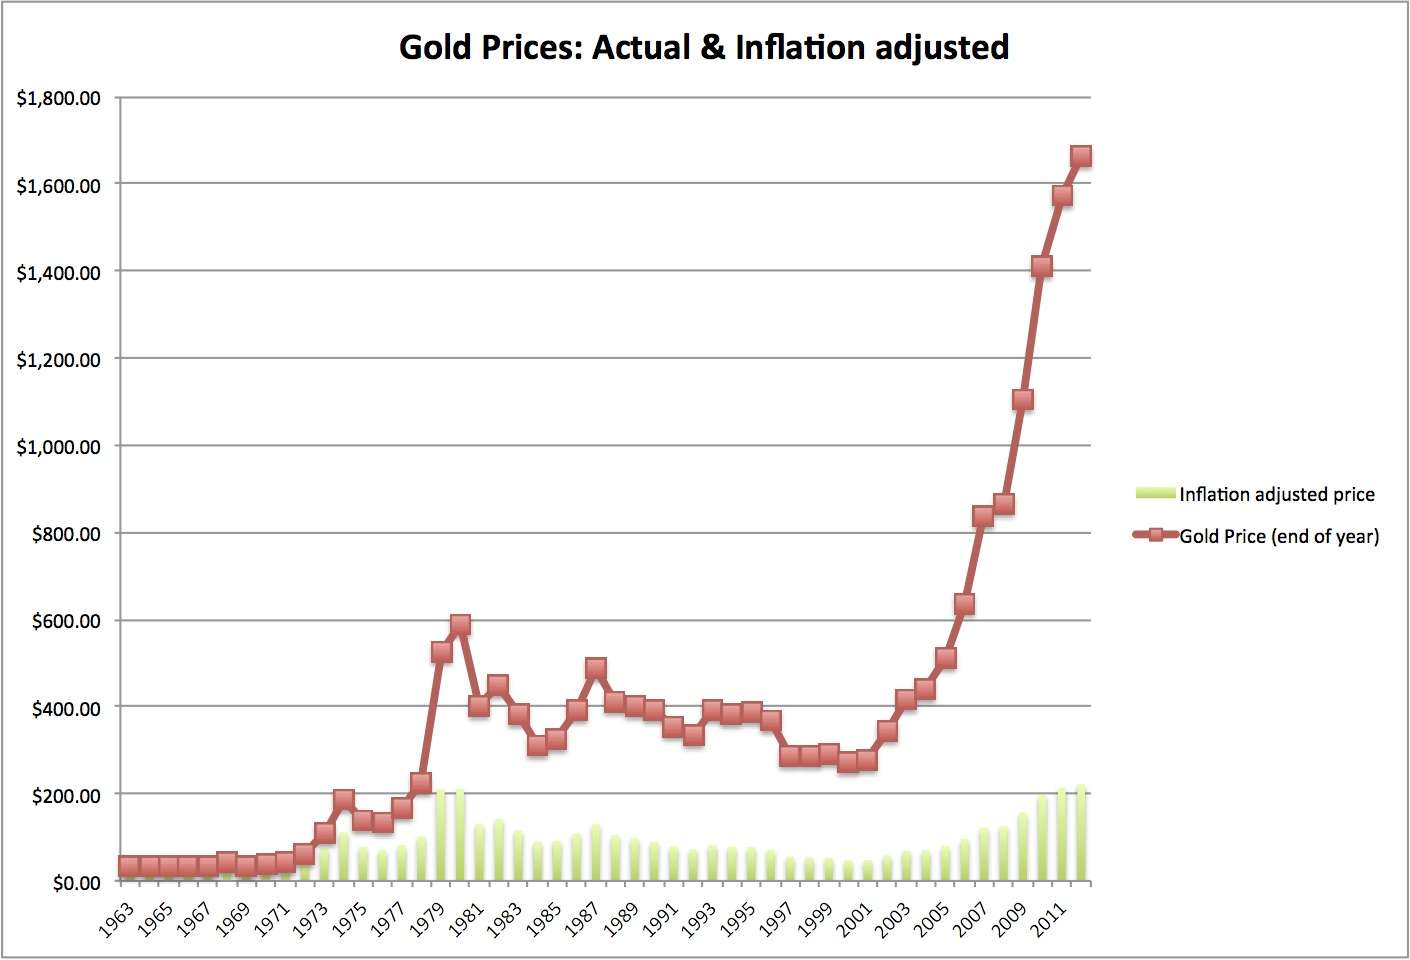 Musings on Markets: The Golden Rule? Thoughts on gold as an investment